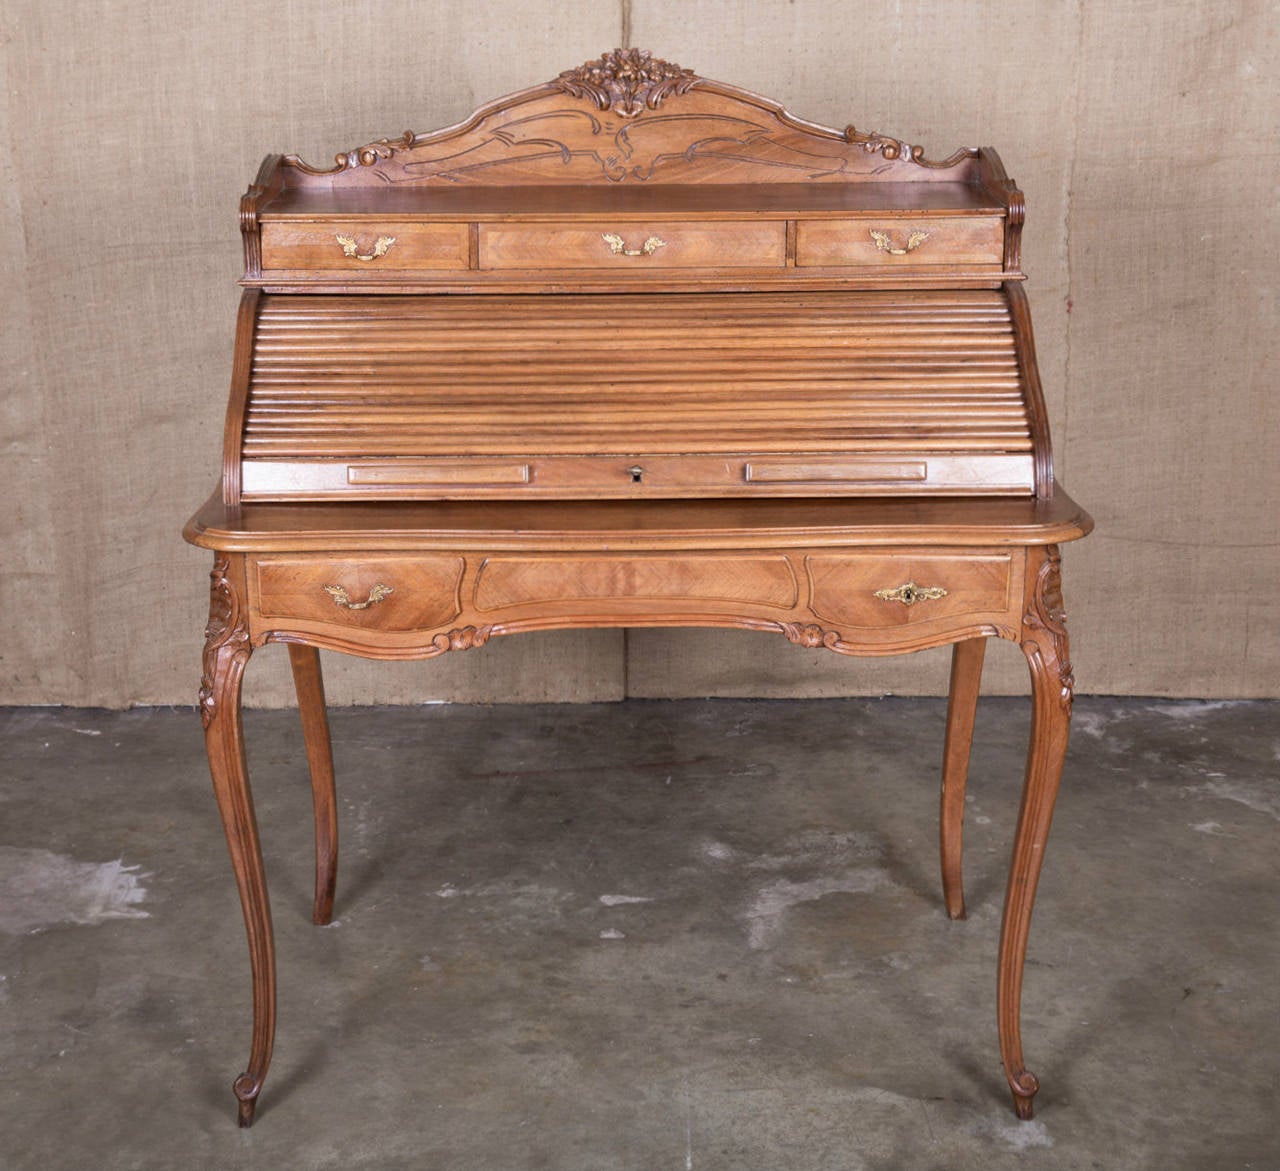 Charming Country French Louis XV style ladies tambour roll top desk or bureau à cylindre of walnut and marquetry with carved floral and foliate backsplash and three upper drawers. Interior with two shelves and storage room, the writing surface is